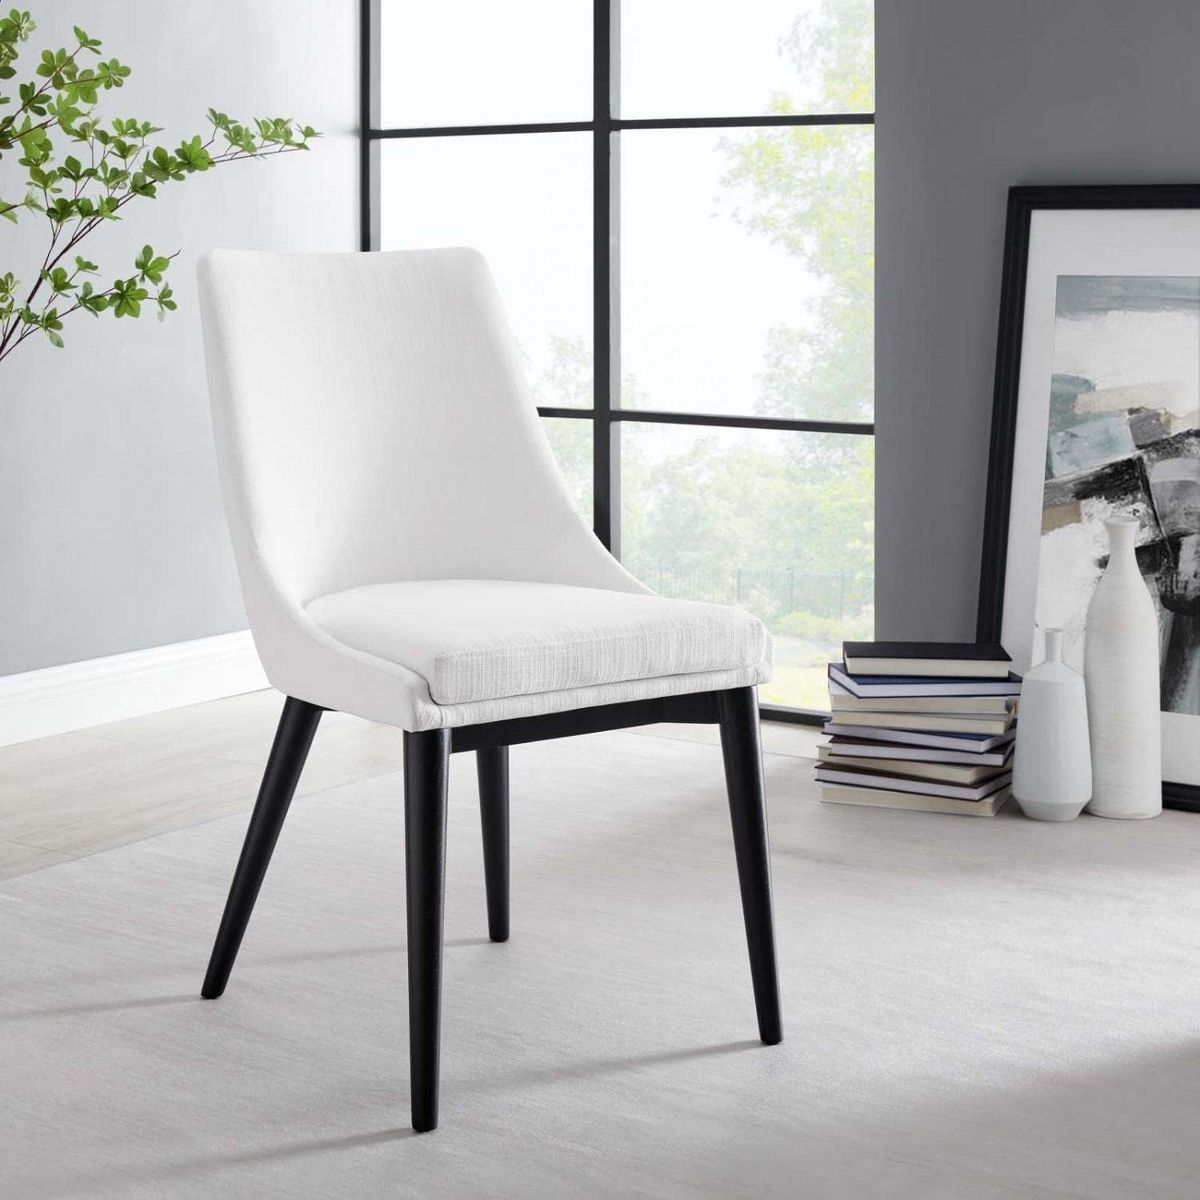 Modway Viscount Fabric Dining Chair | Target